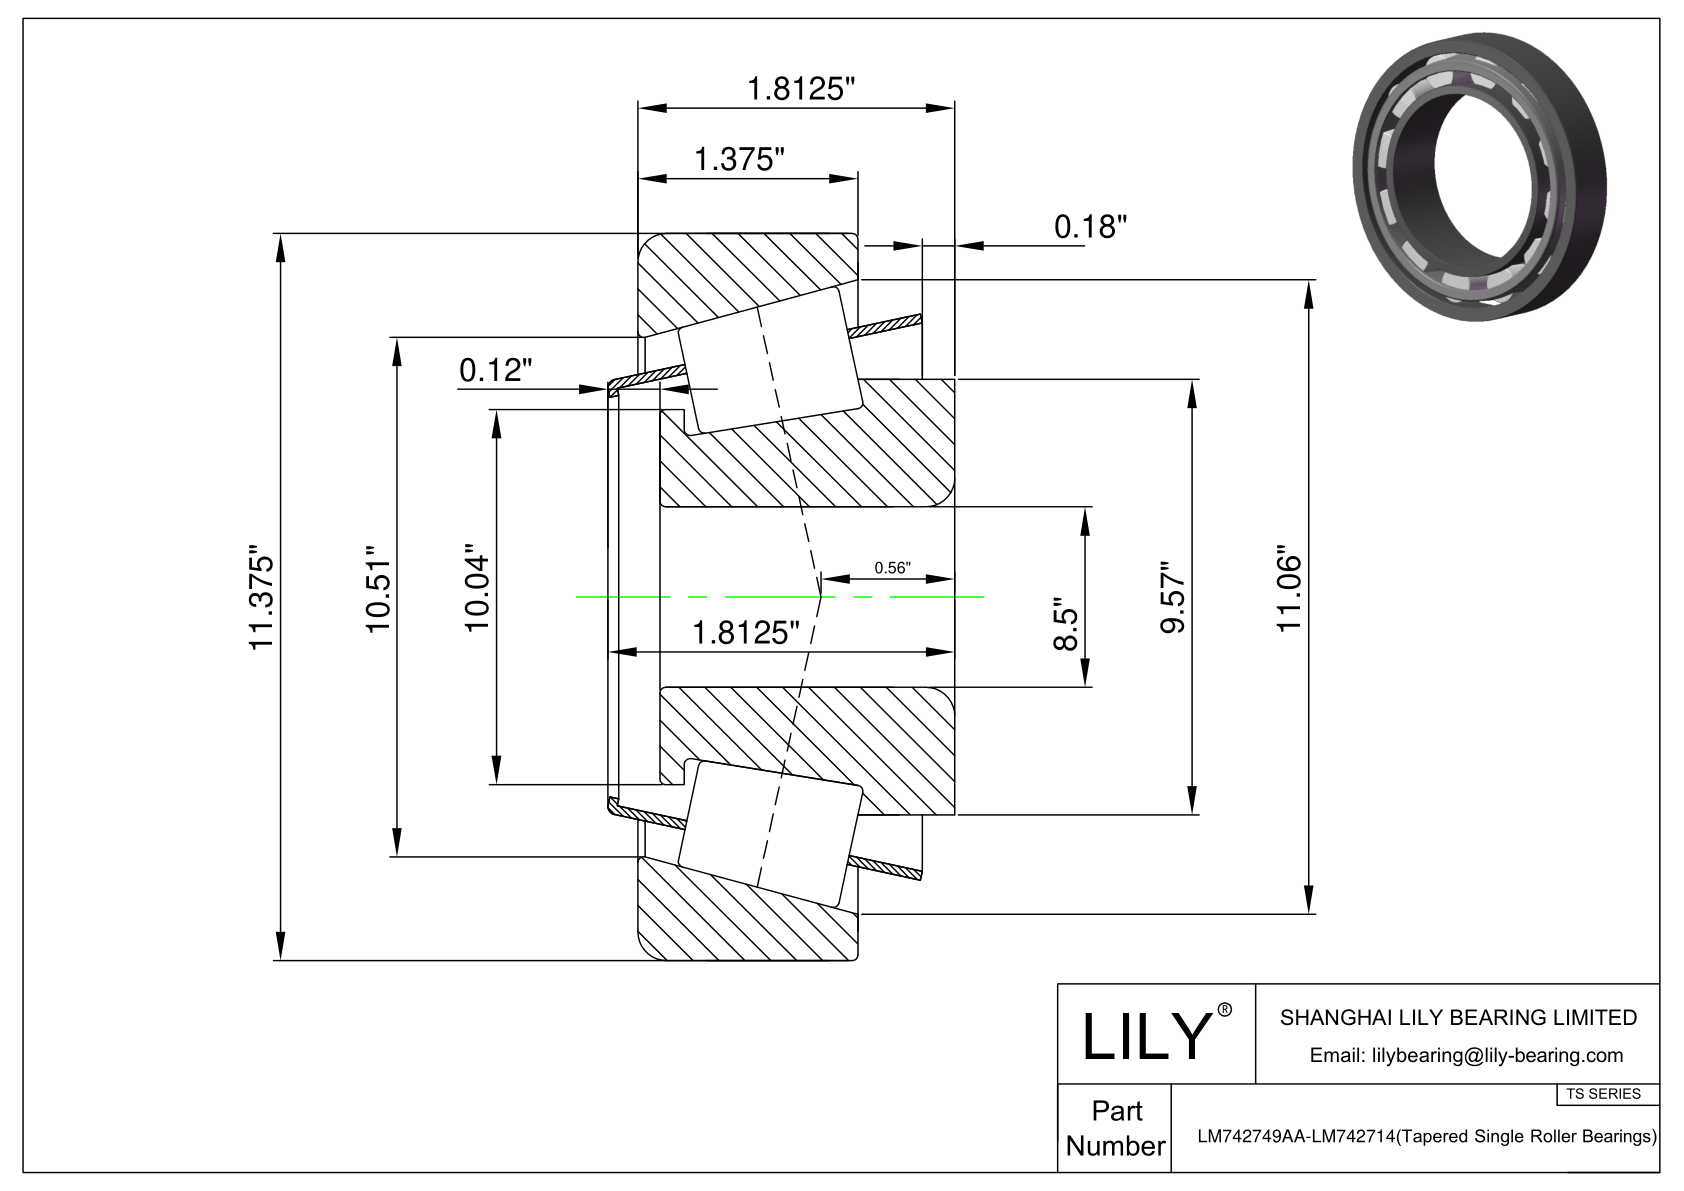 LM742749AA-LM742714 TS (Tapered Single Roller Bearings) (Imperial) cad drawing